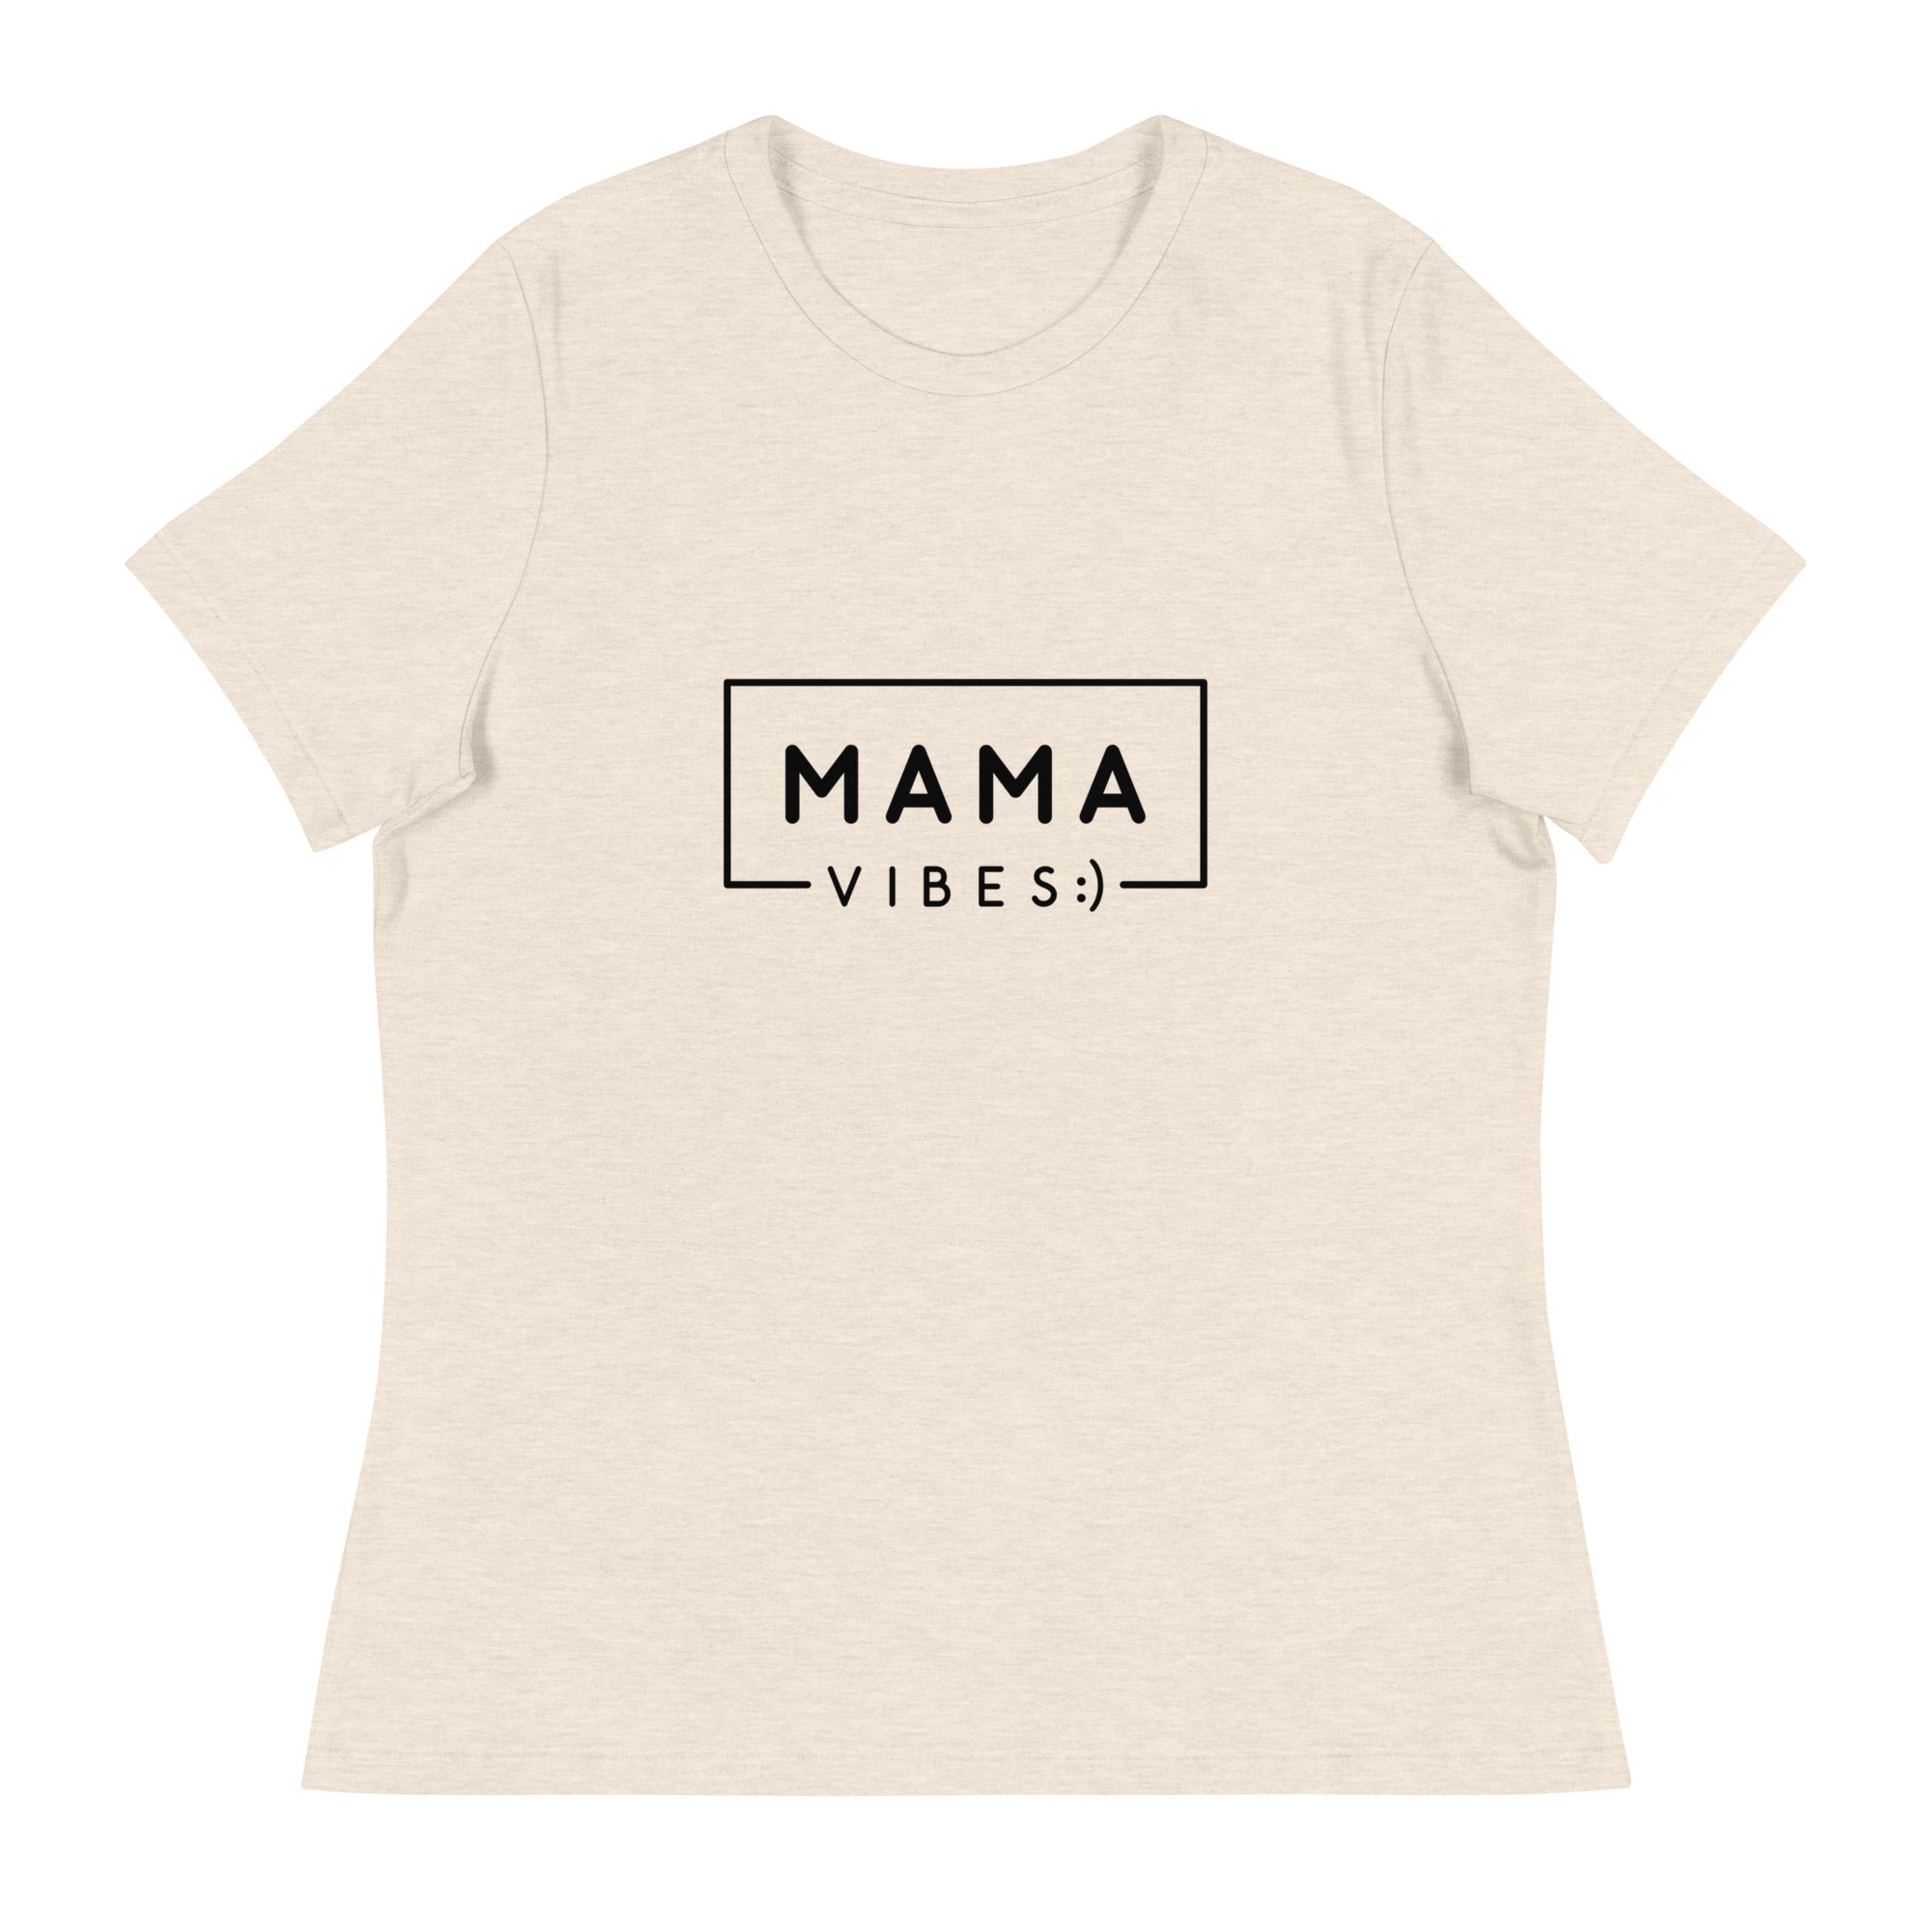 MAMA VIBES - Women's Relaxed T-Shirt